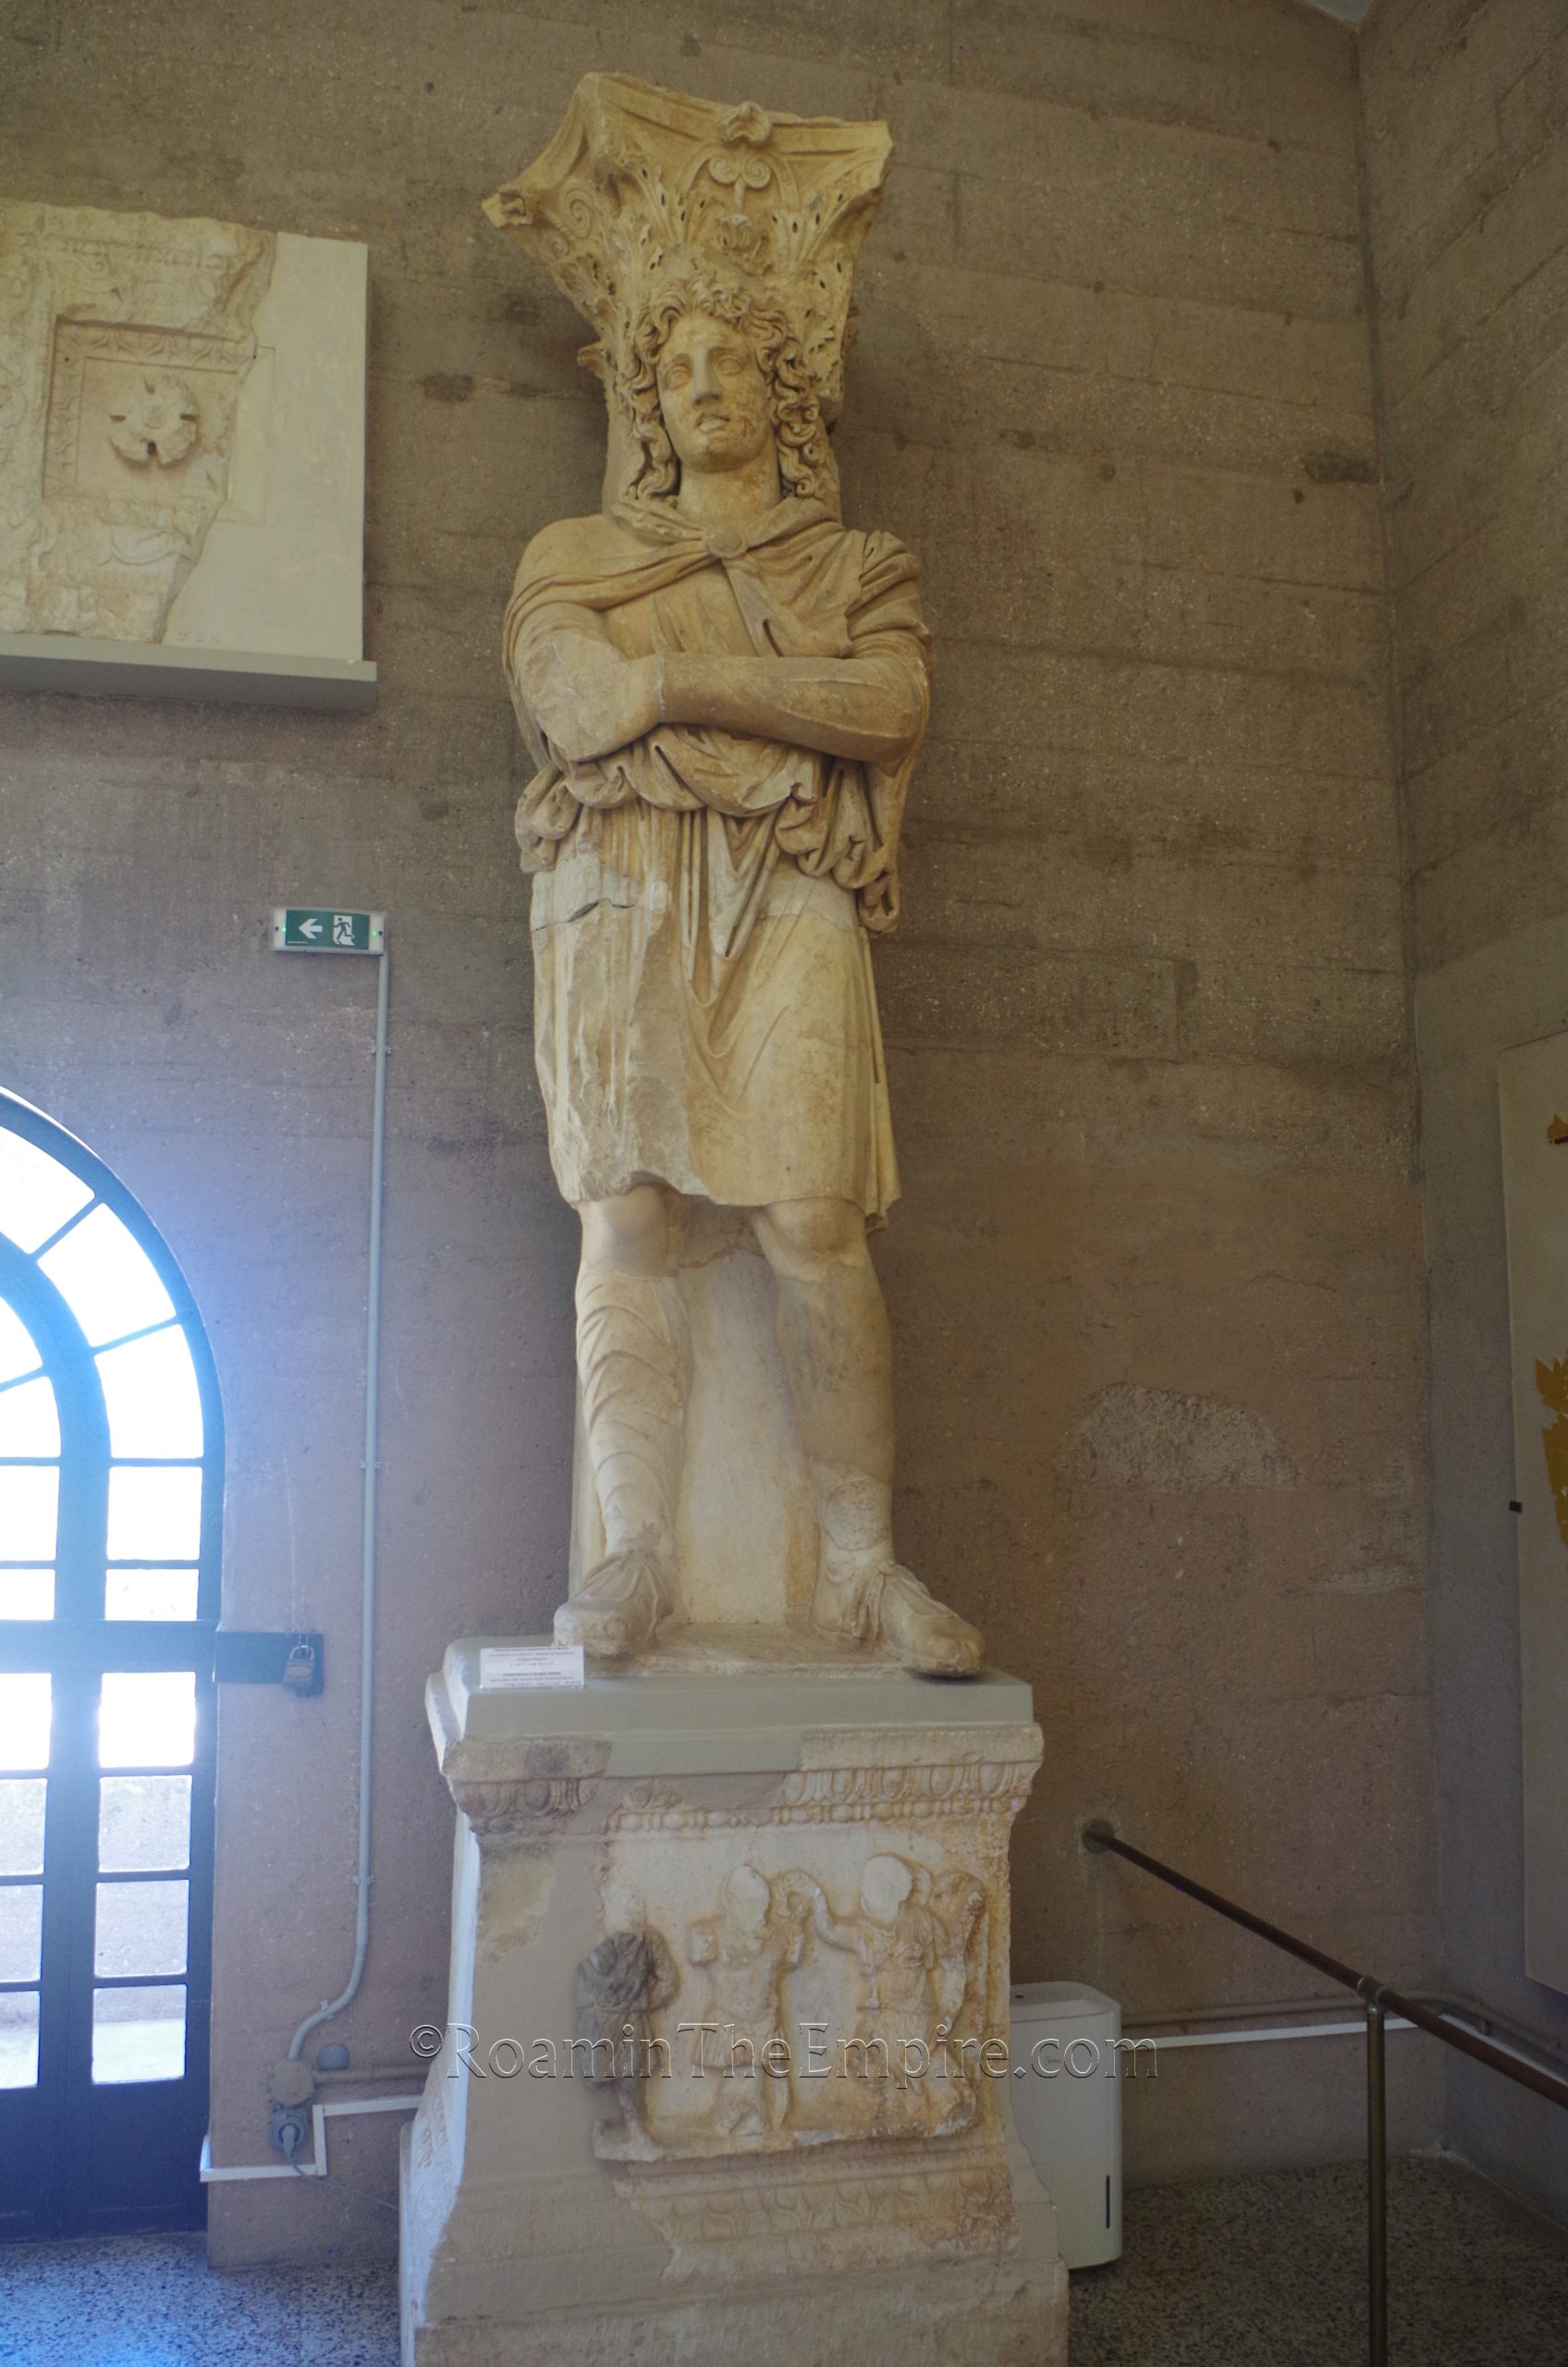 Phrygian captive statue from the Captive's Facade. From the late 2nd century CE. Corinth Museum.